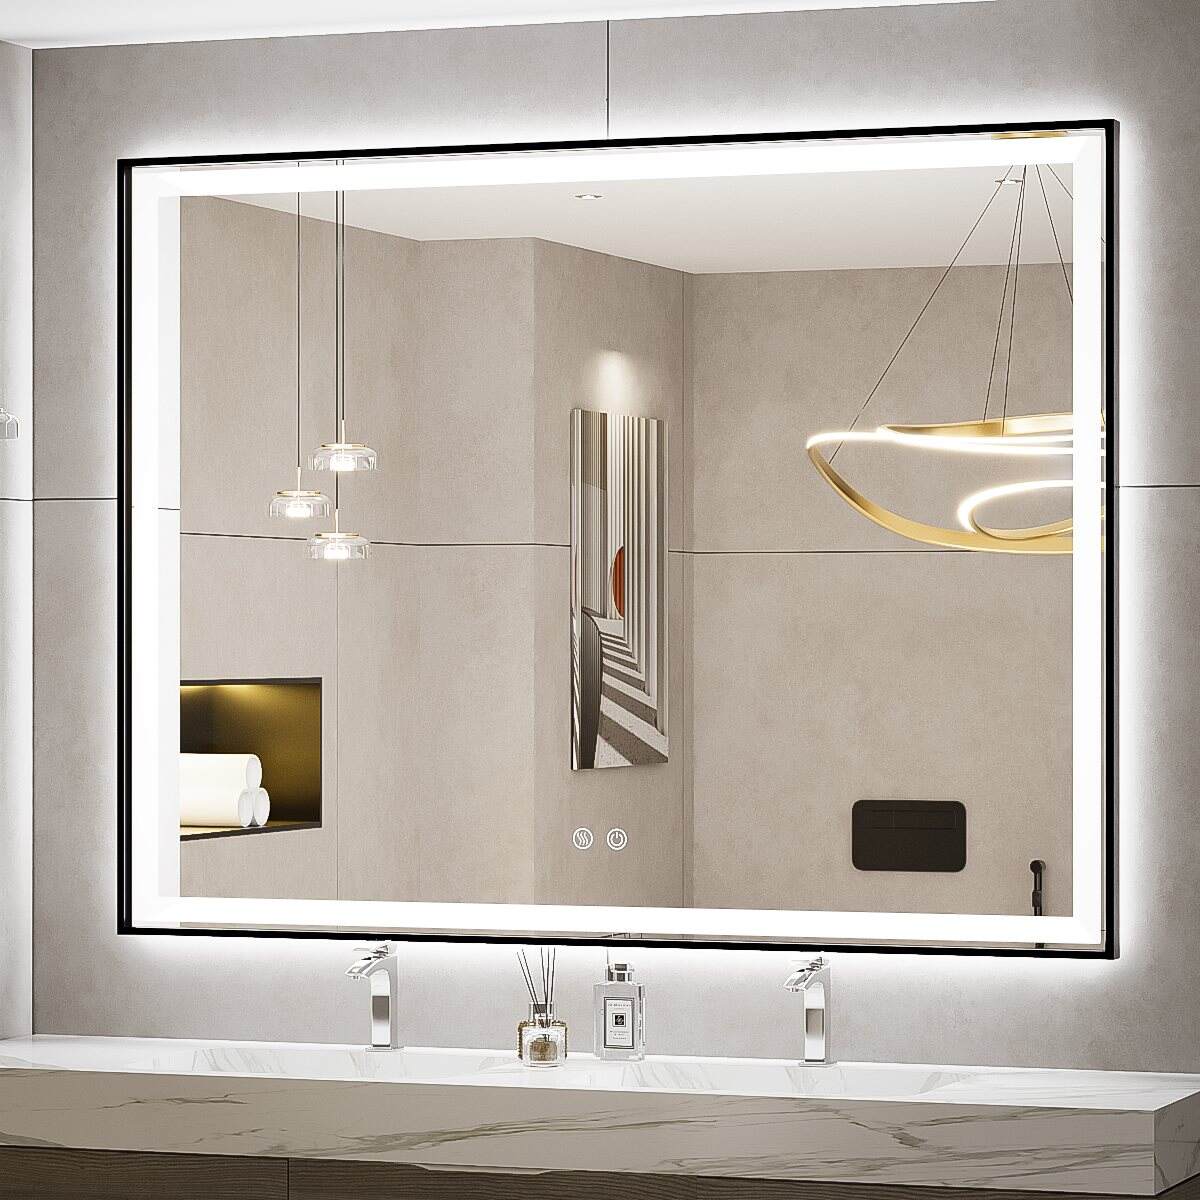 JJGullit bathroom mirror supplier 30x40 Inch LED Bathroom Mirror with Lights, Frontlit and Backlit, Lighted Bathroom Vanity Mirror, Stepless Dimmable, French Cleats Wall Mount Anti-Fog Mirror(H